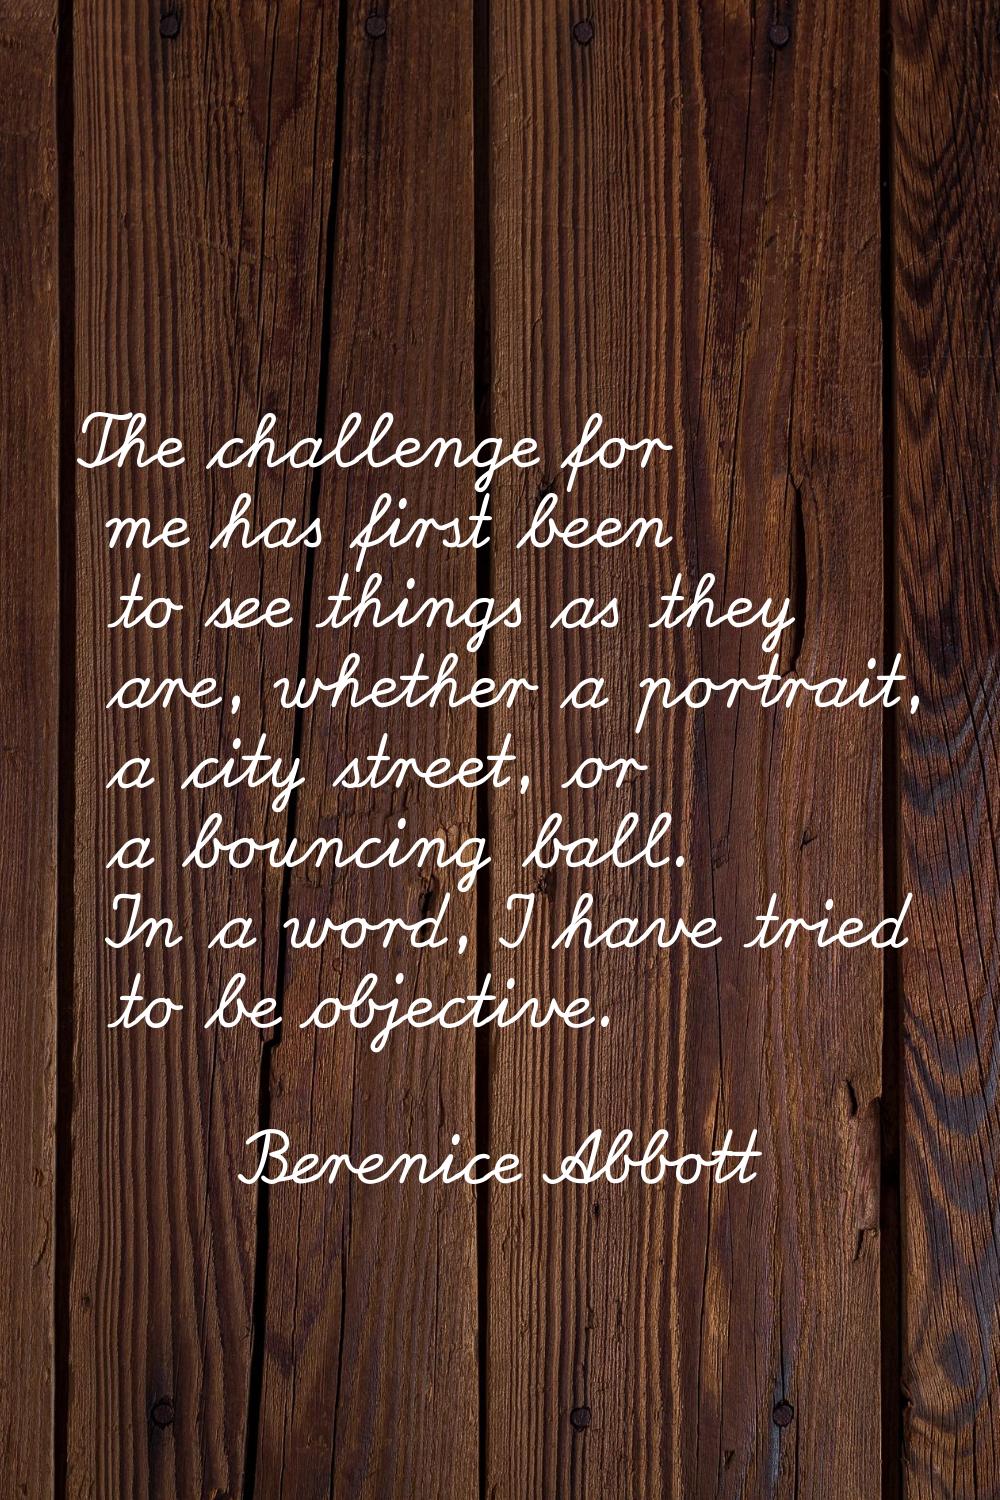 The challenge for me has first been to see things as they are, whether a portrait, a city street, o